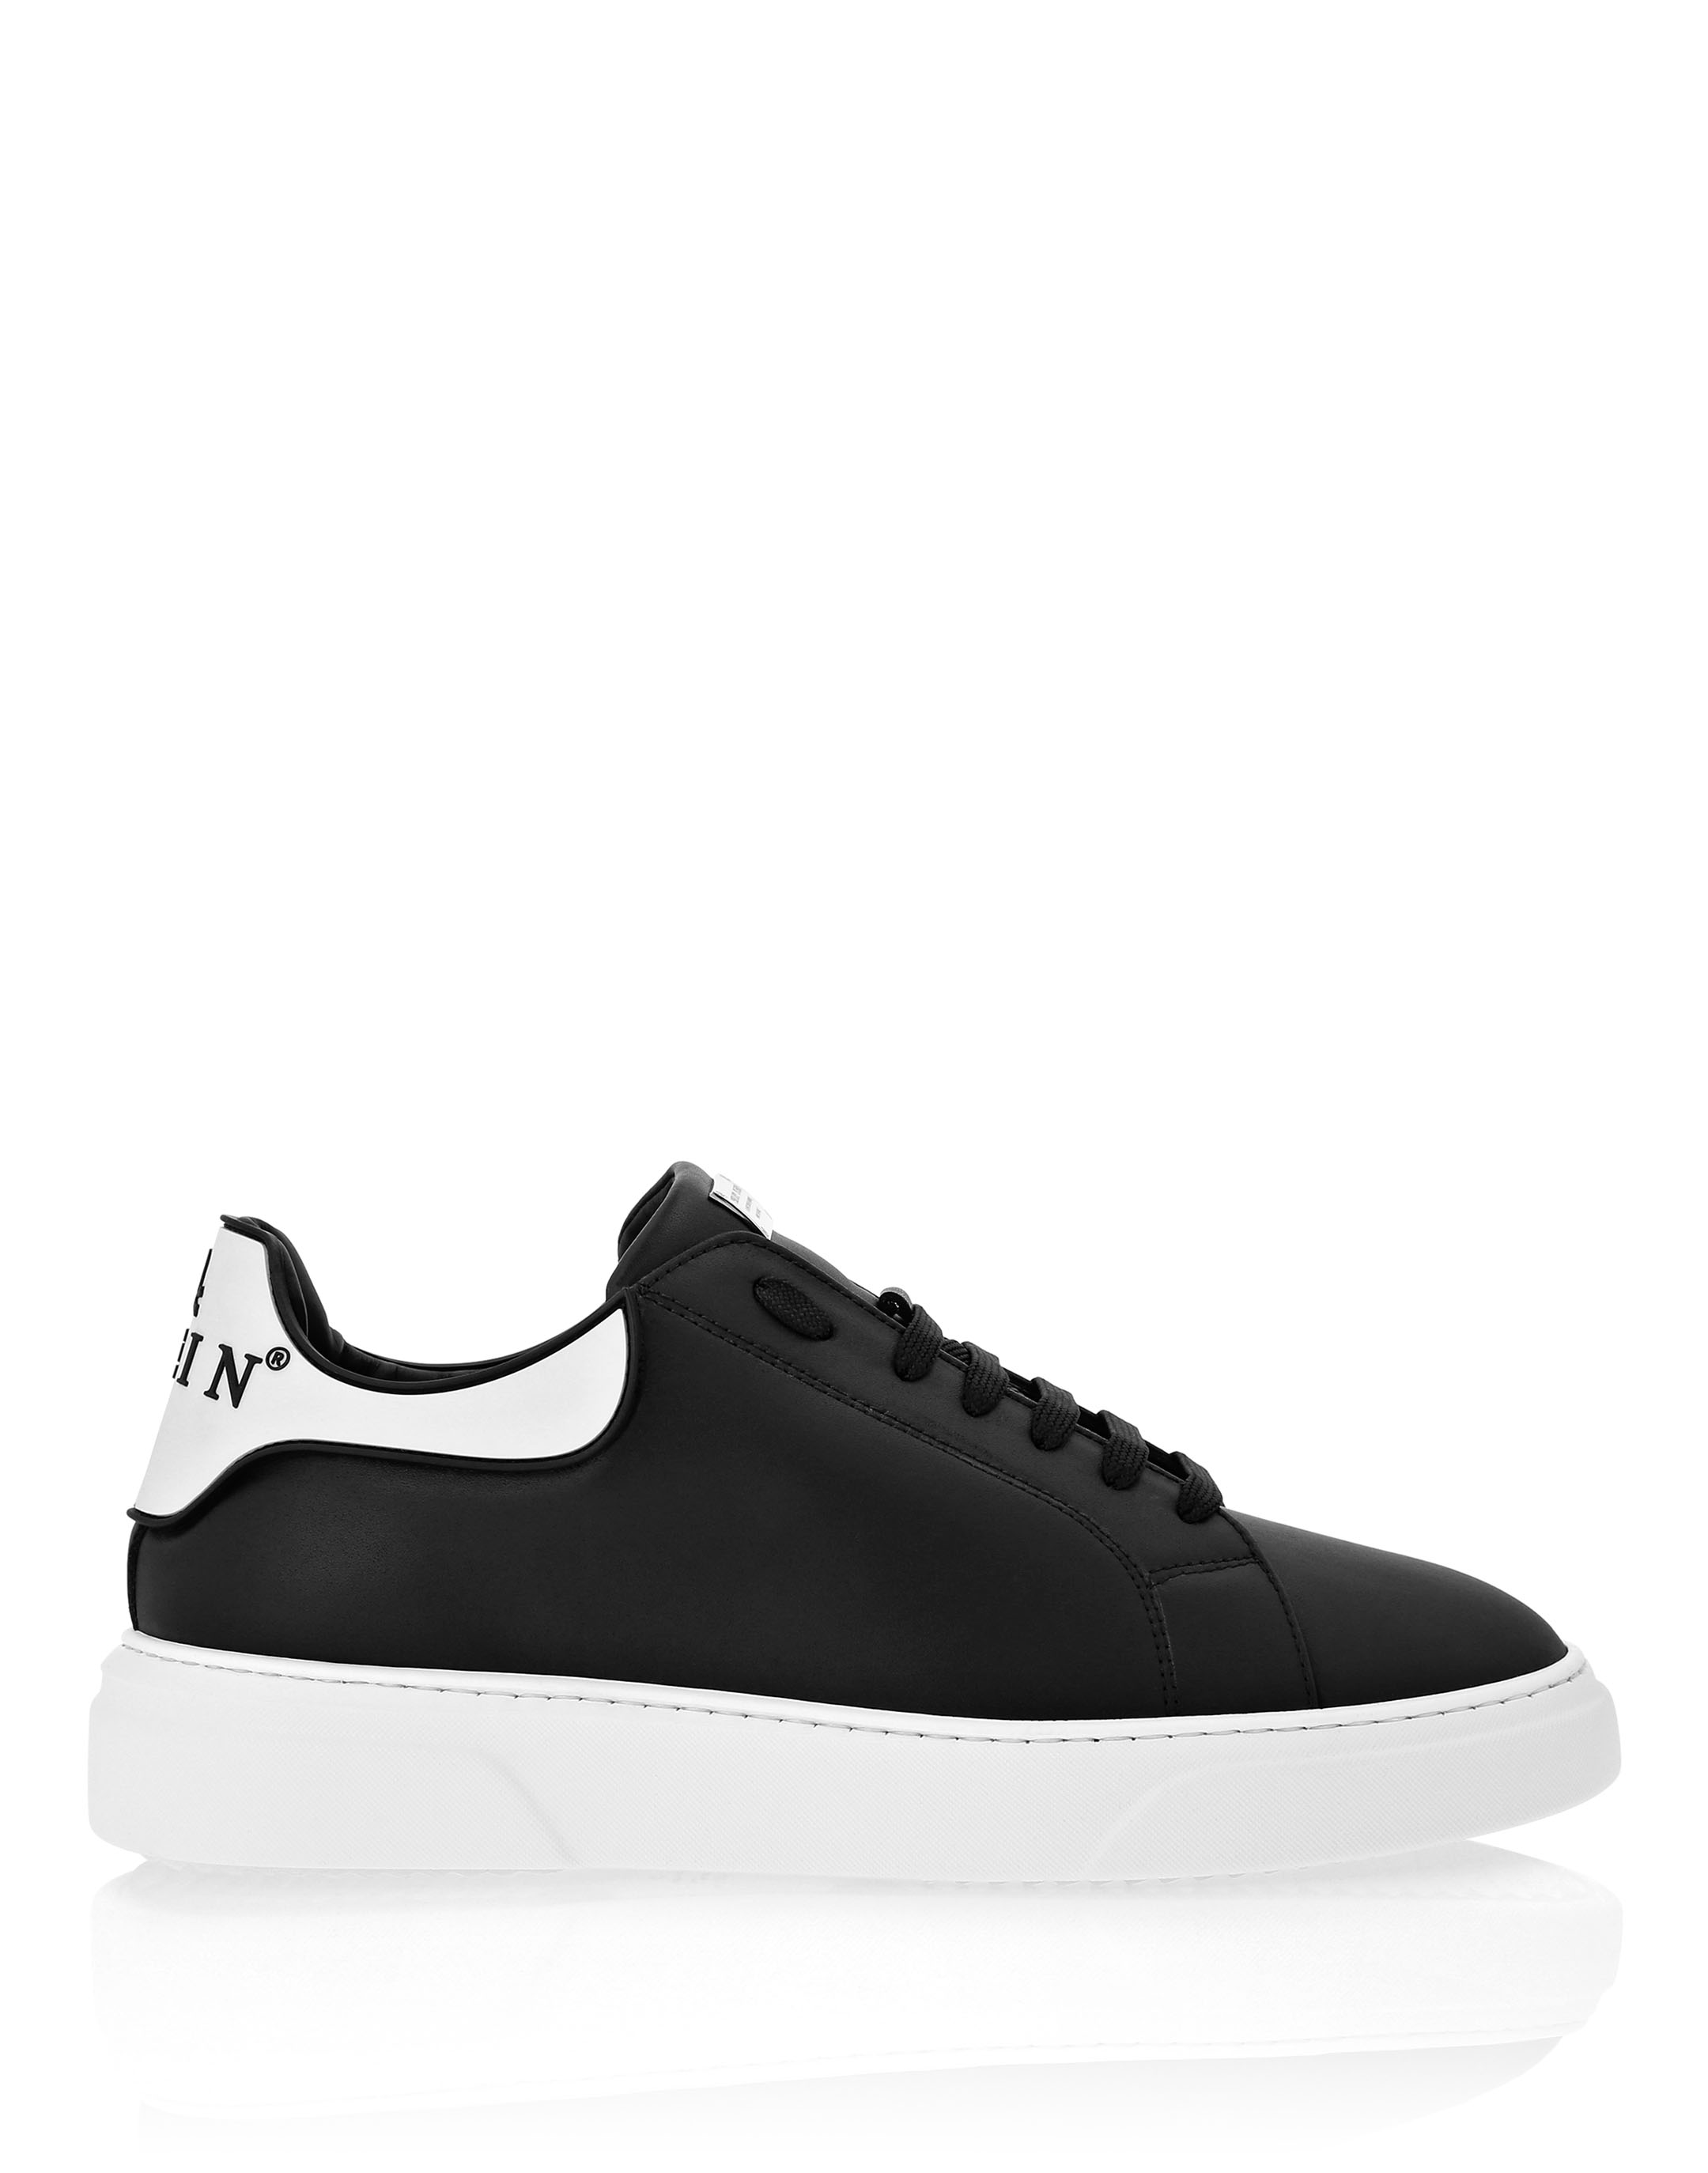 LEATHER SNEAKERS BIG BANG | Philipp Plein Outlet